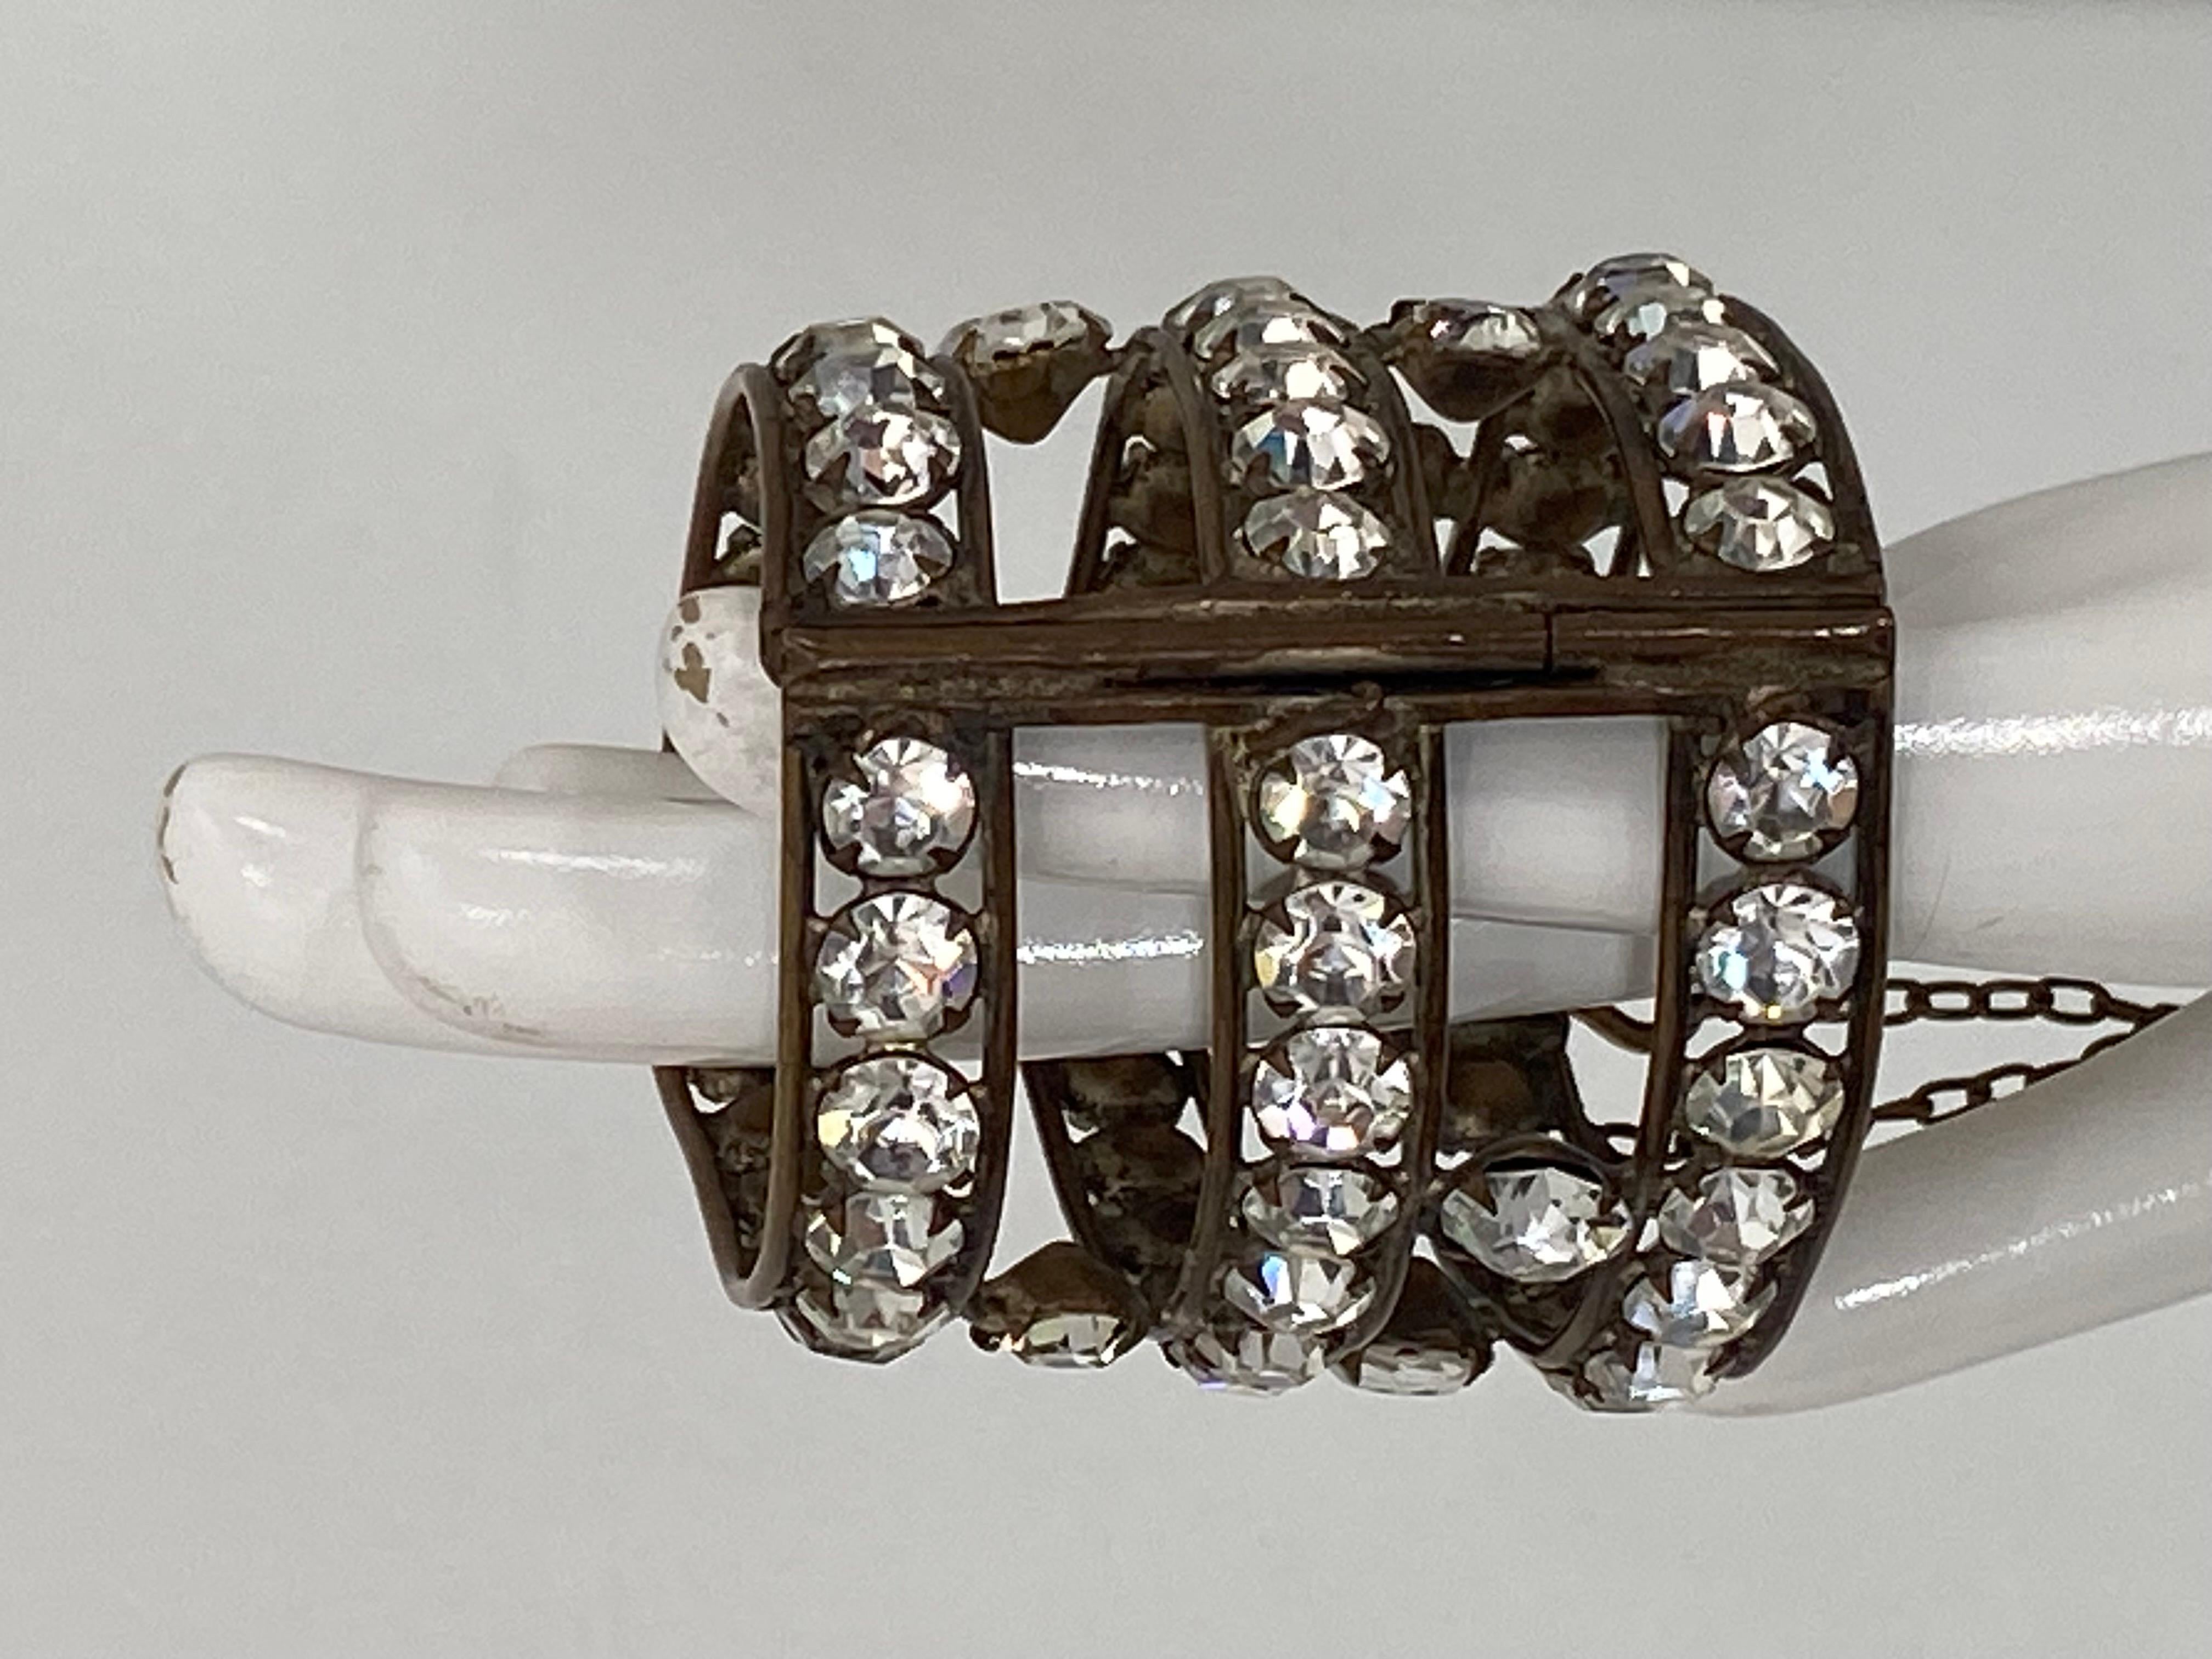 1920s flapper costume, open work brass frame cuff bracelet with large sparkly prong set rhinestones. The bracelet is oval and narrow at the opening near the hand & wider at the opening up your arm. Opens and closes at the side with a long pin that